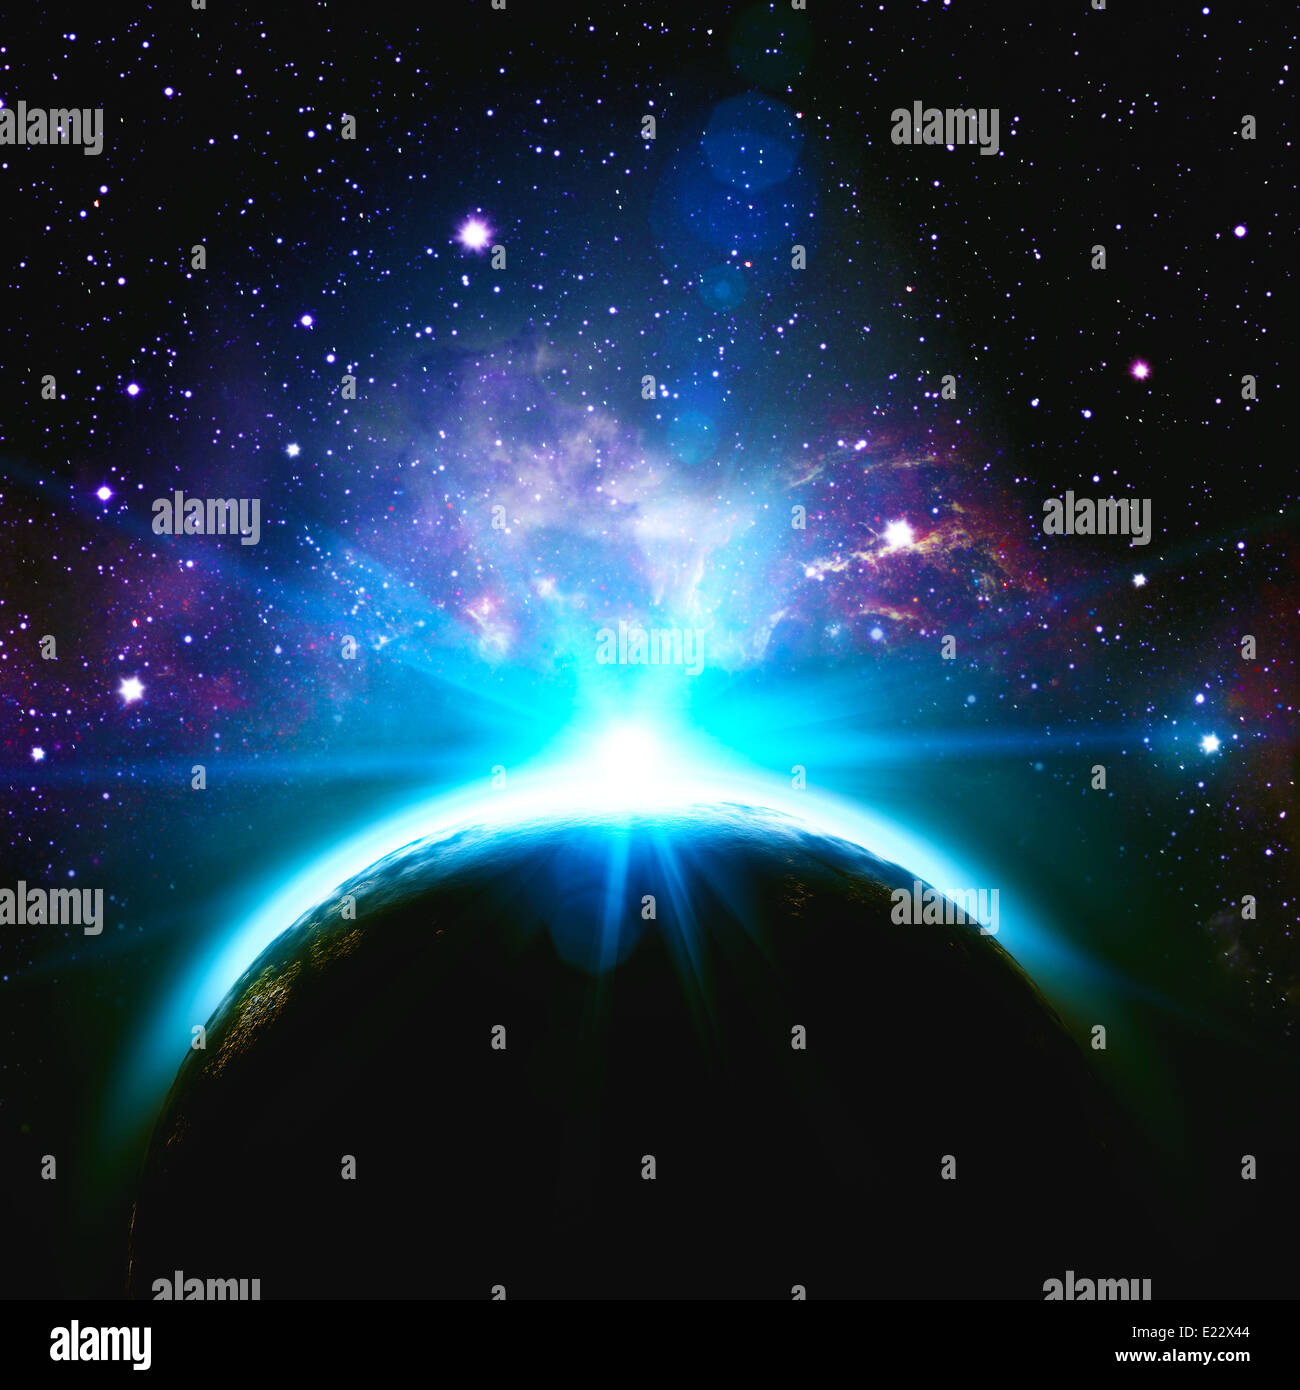 Deep space, abstract sci-fi backgrounds for your design Stock Photo